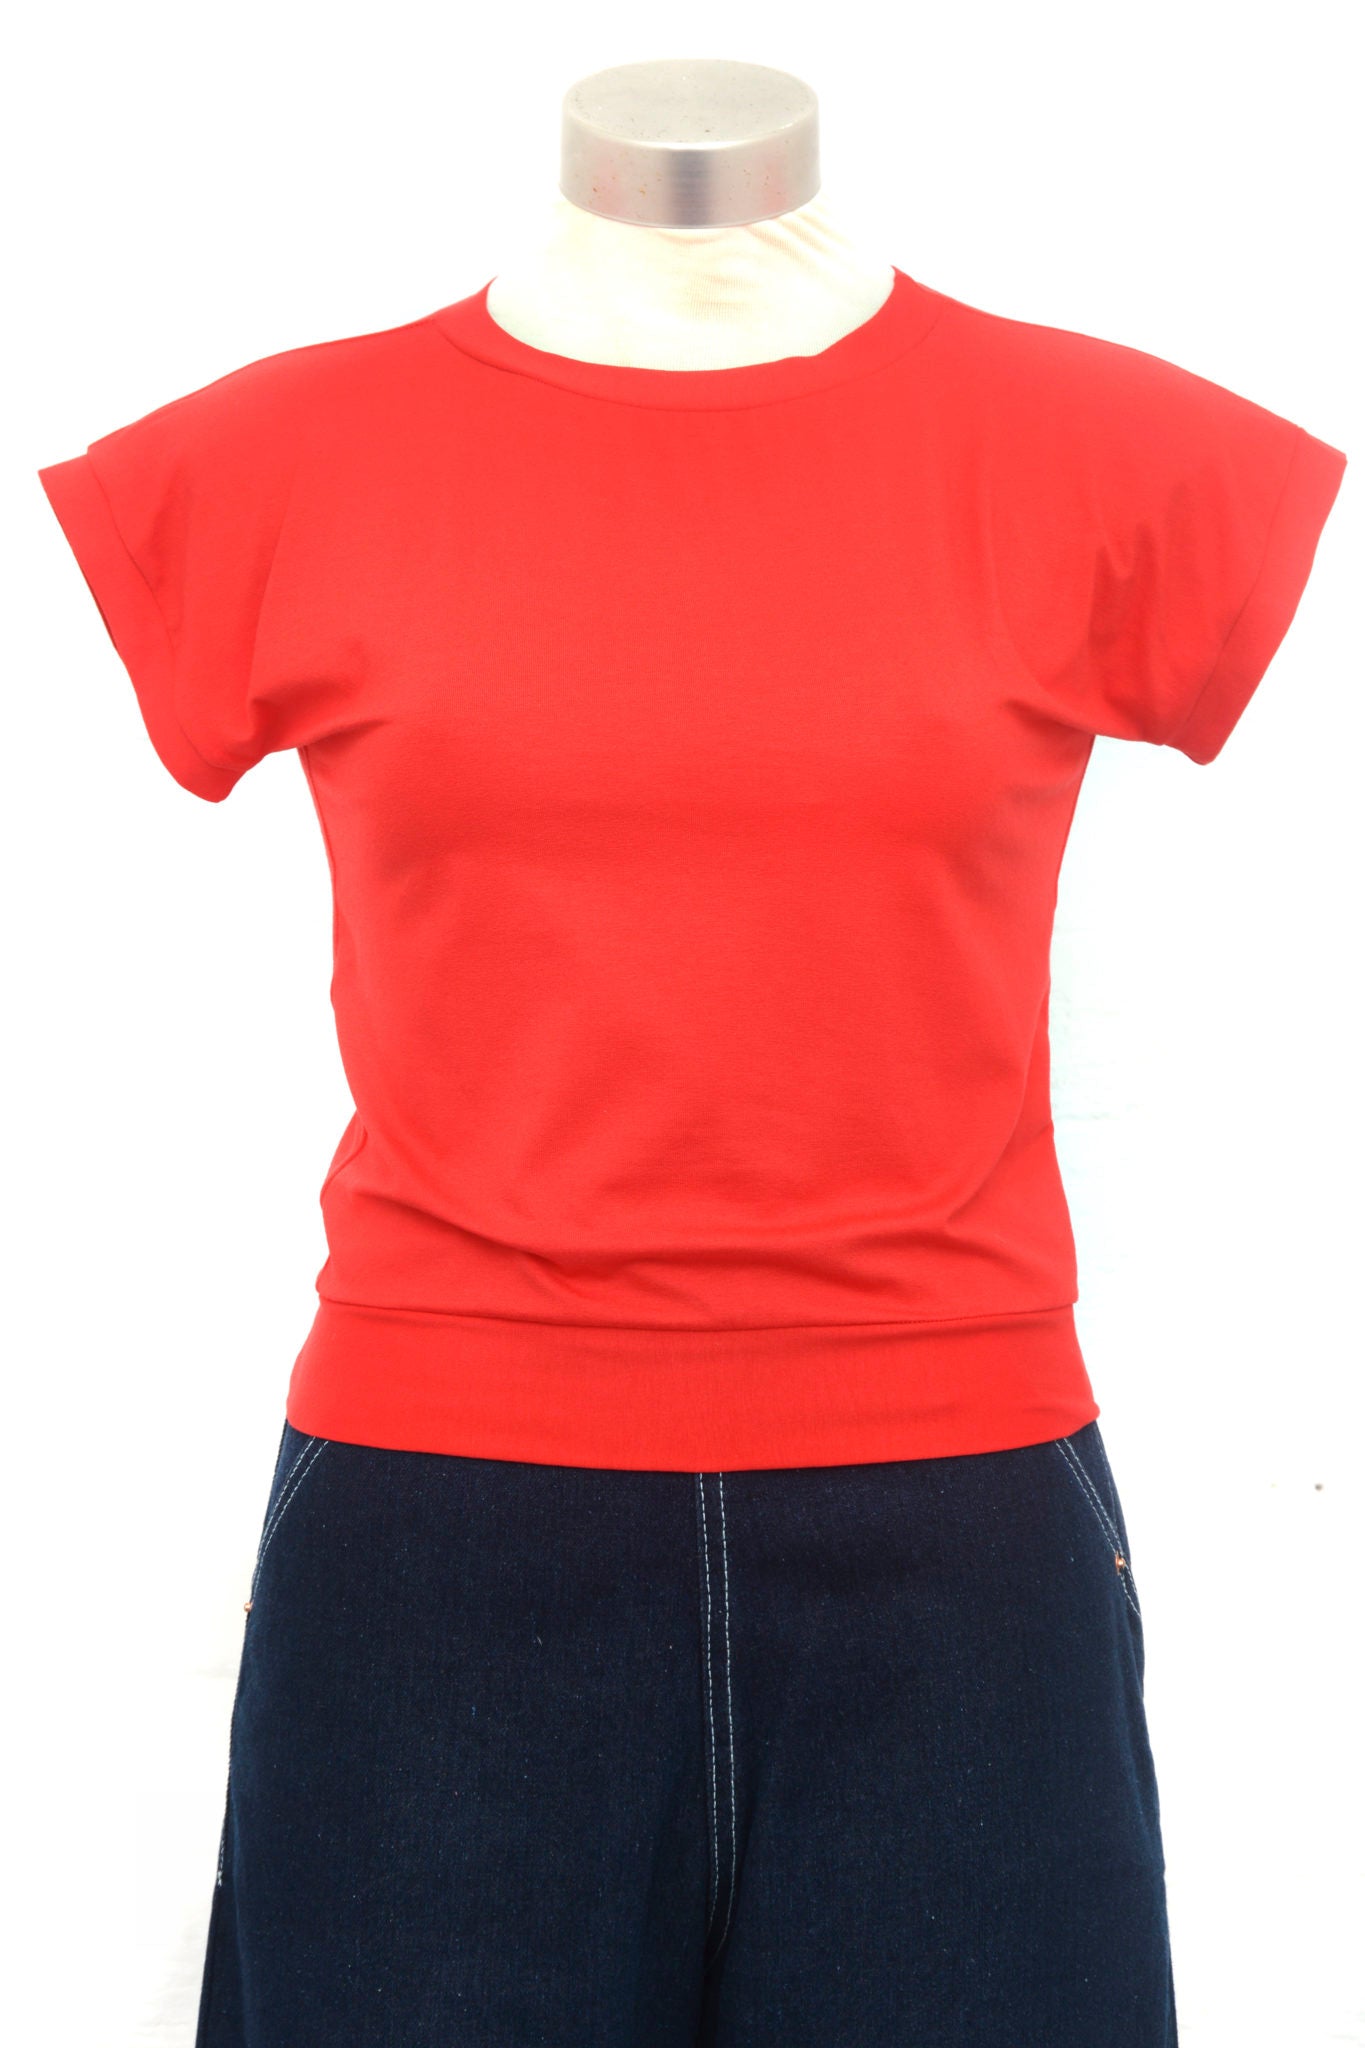 Picnic Top  Red